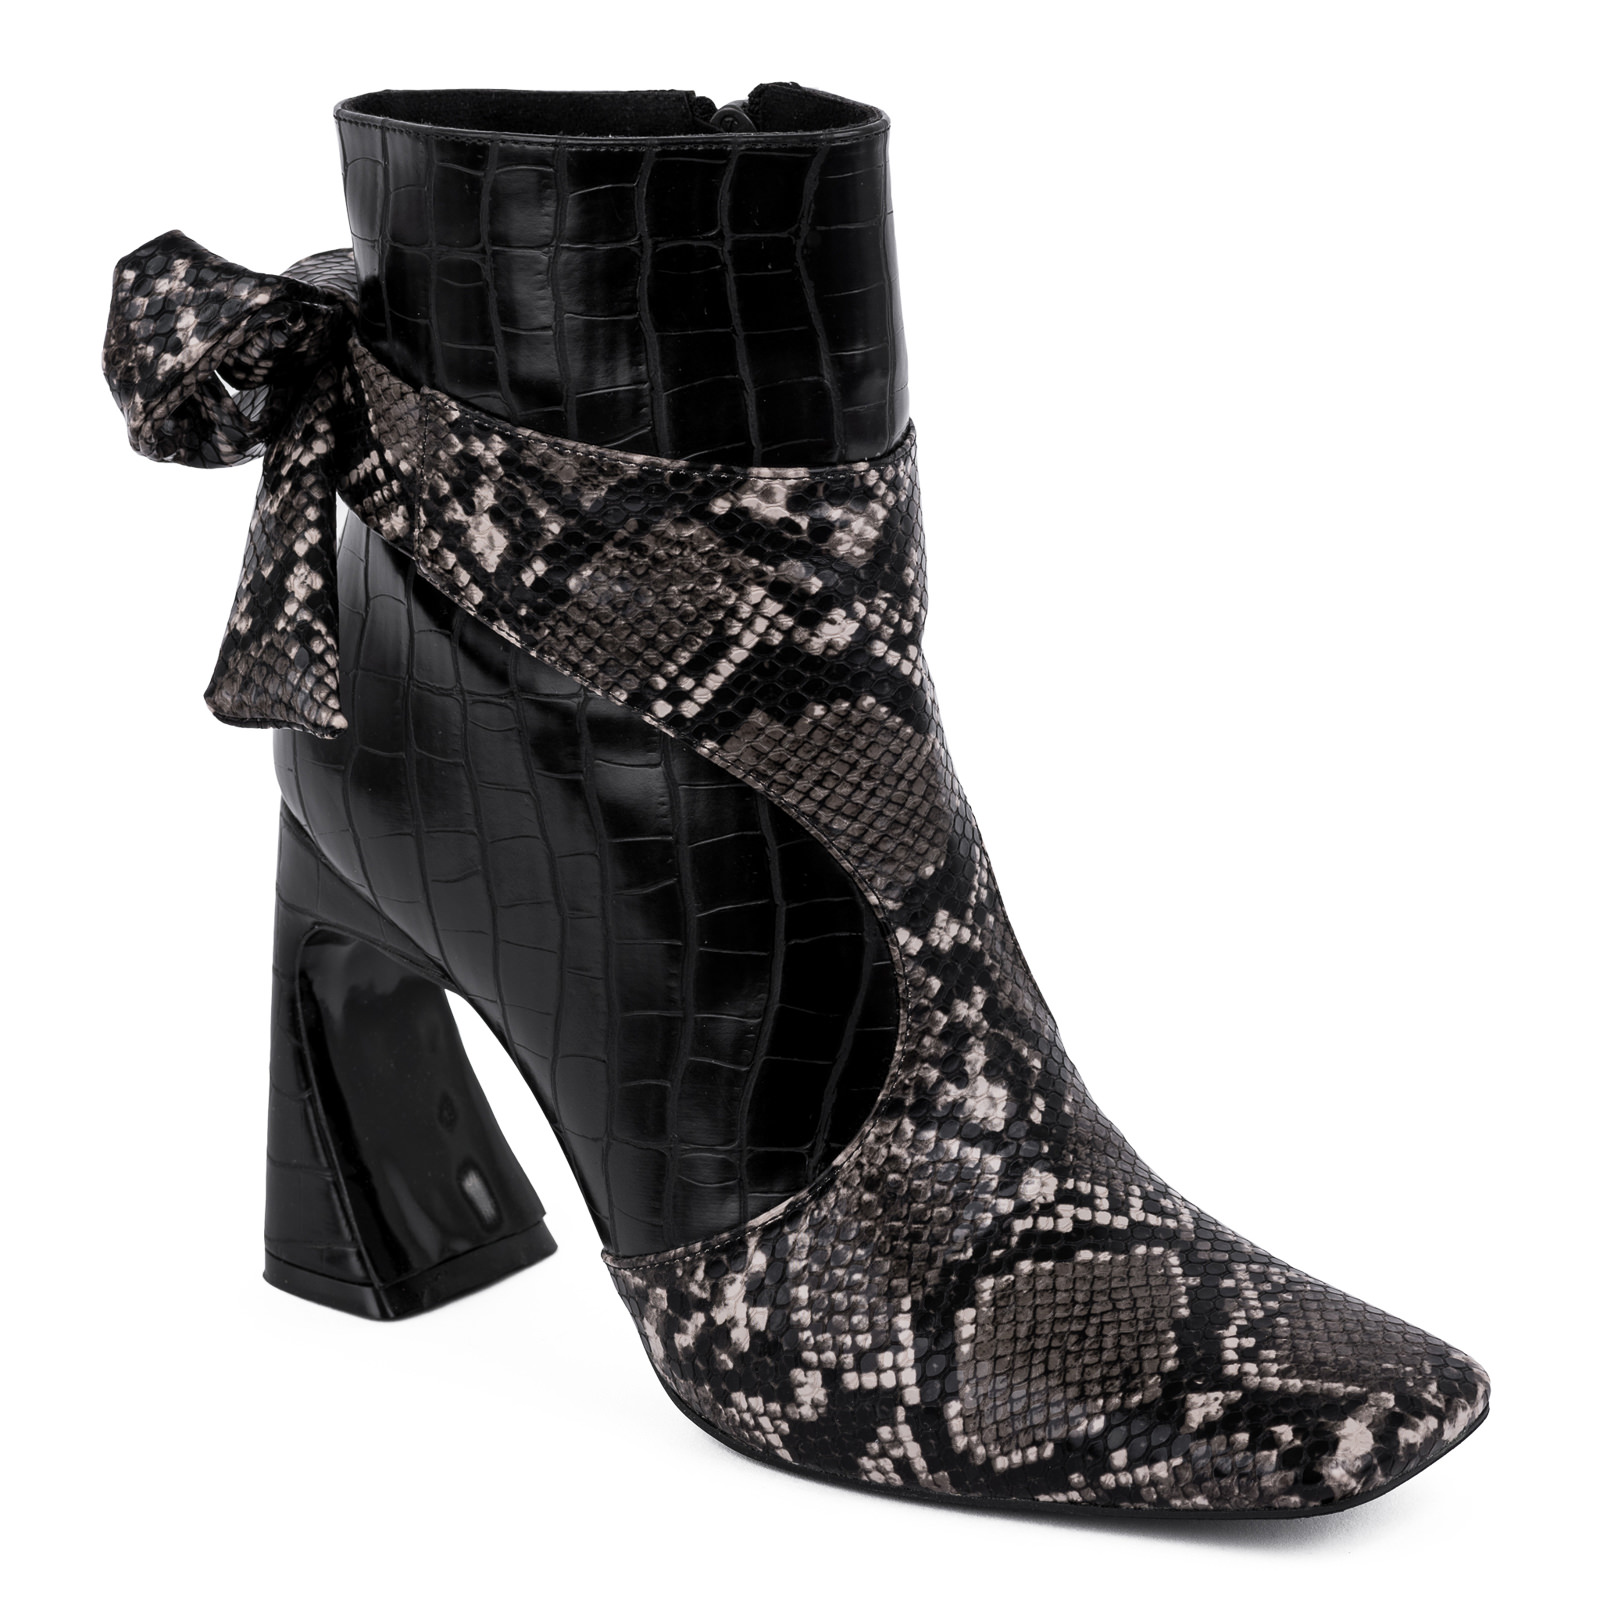 SNAKE ANKLE BOOTS WITH THICK HEEL AND BOW - BLACK